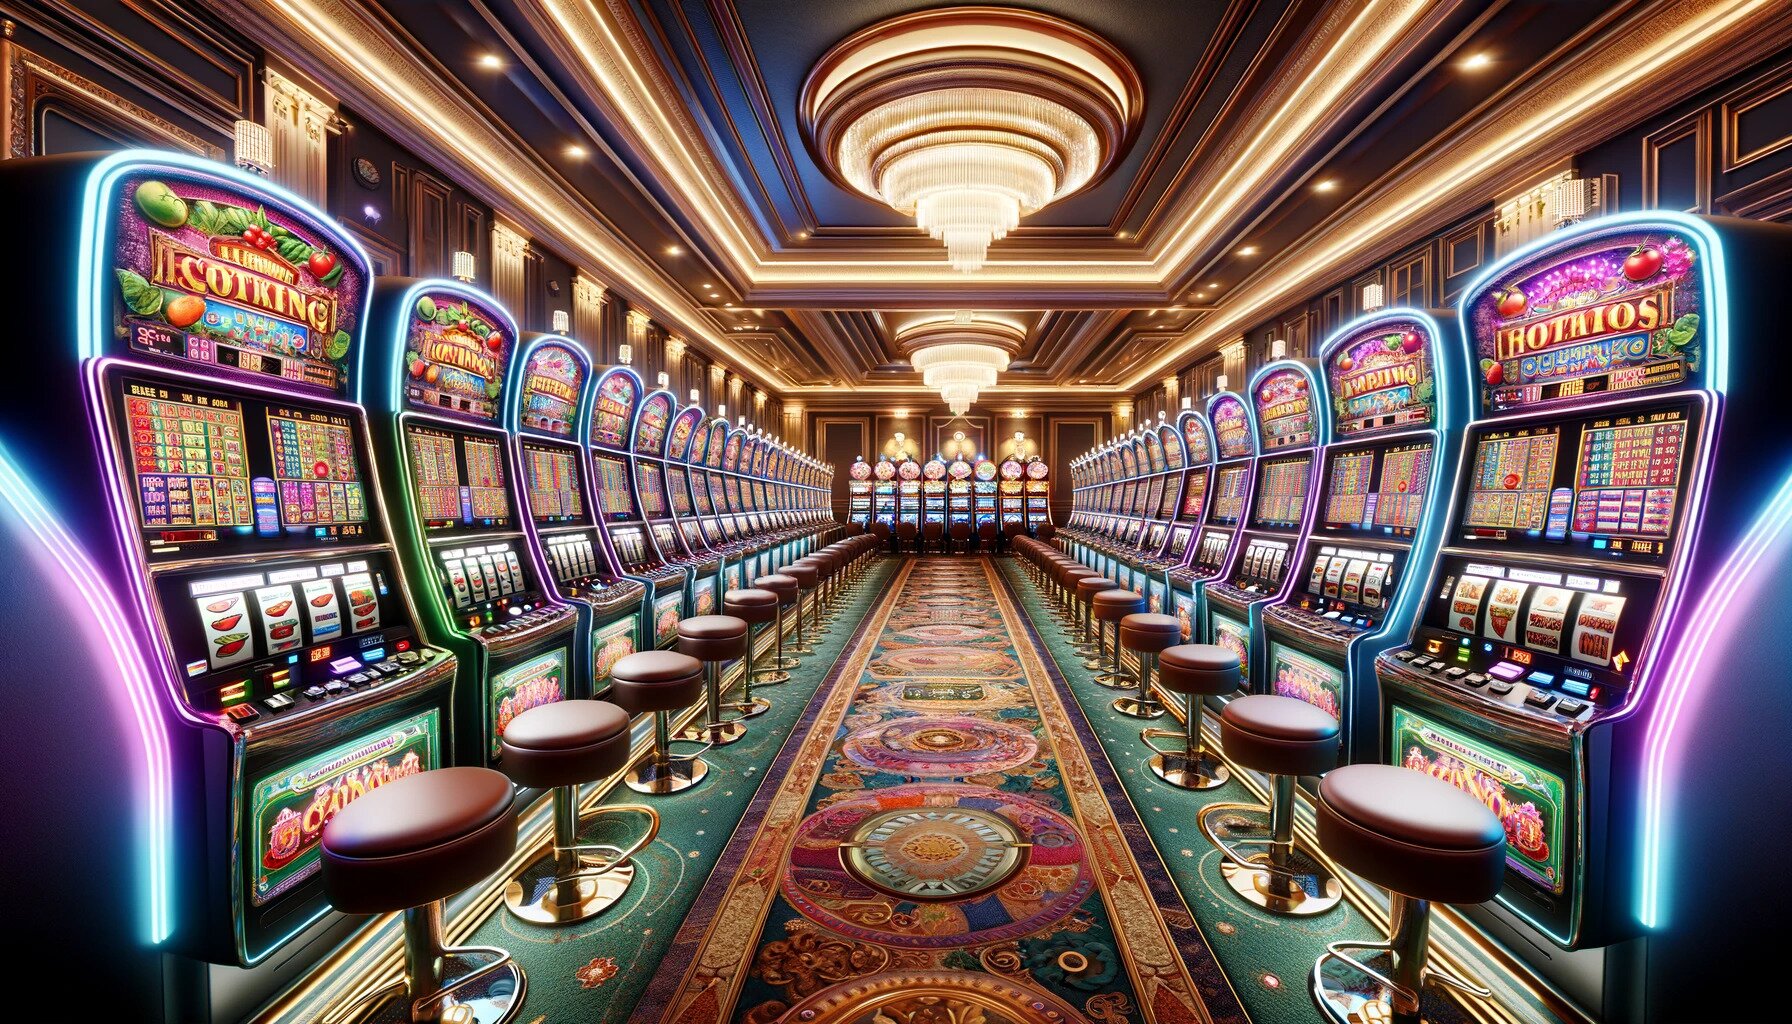 Rows of slot machines